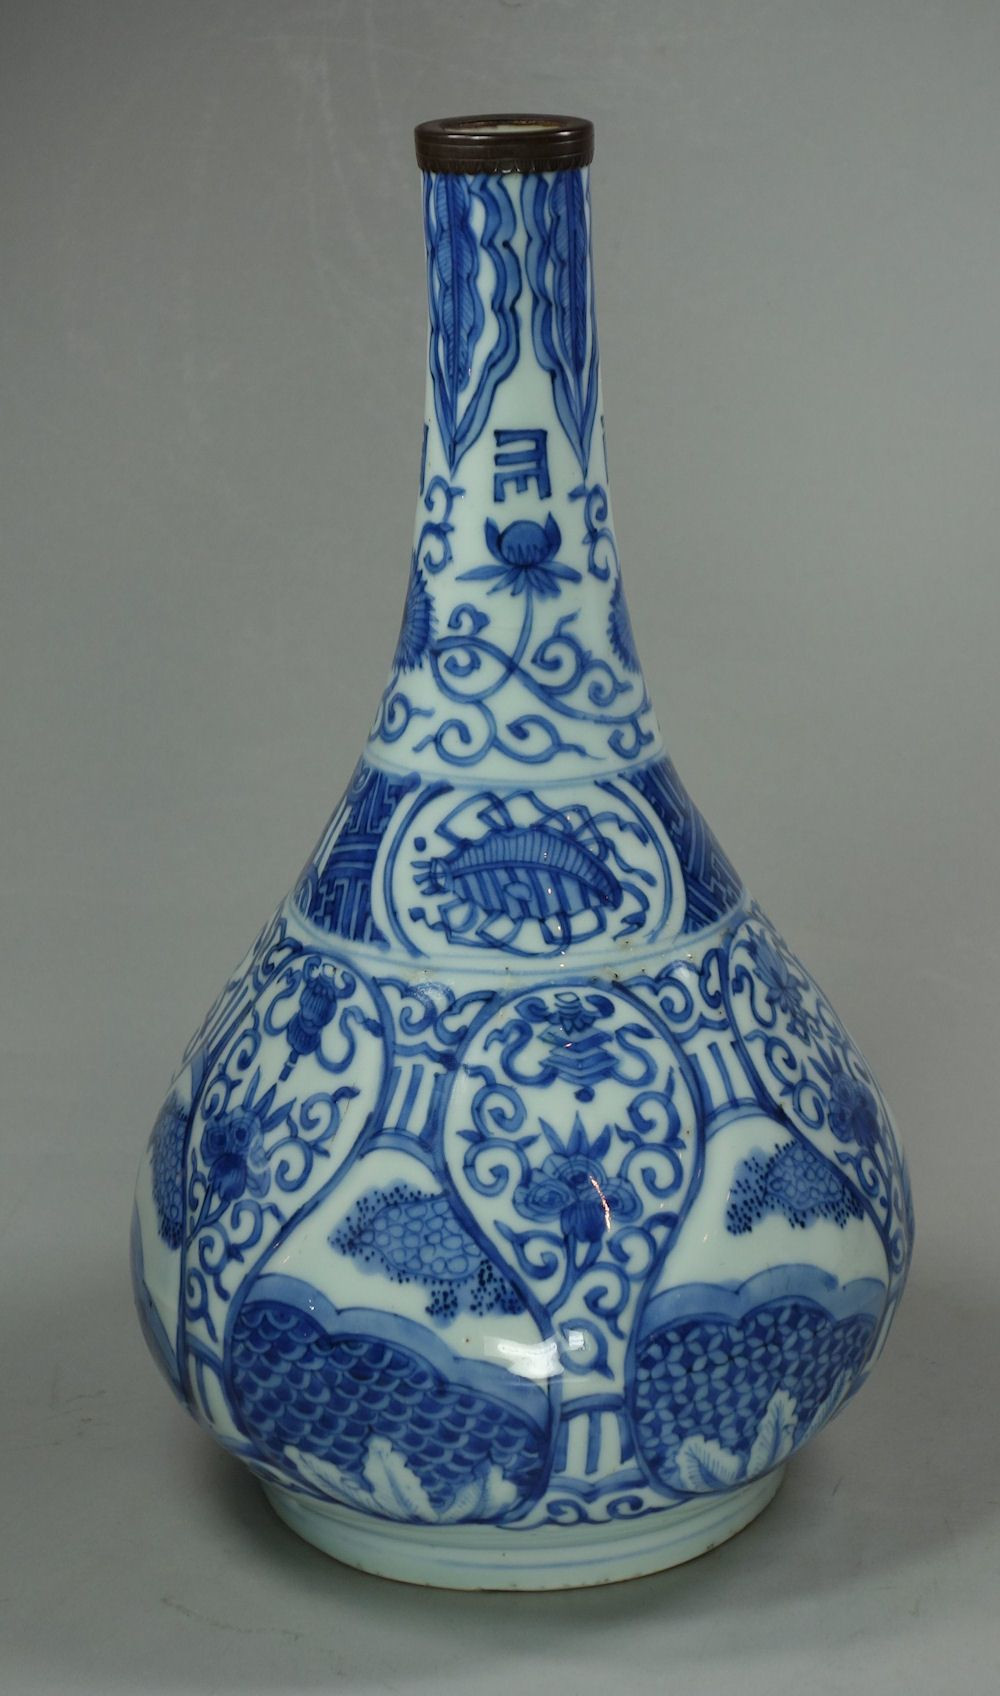 17 Lovely Blue and White Vases Cheap 2024 free download blue and white vases cheap of chinese blue and white kraak bottle vase wanli 1573 1610 with a for chinese blue and white kraak bottle vase wanli 1573 1610 with a moulded body of stylised fol